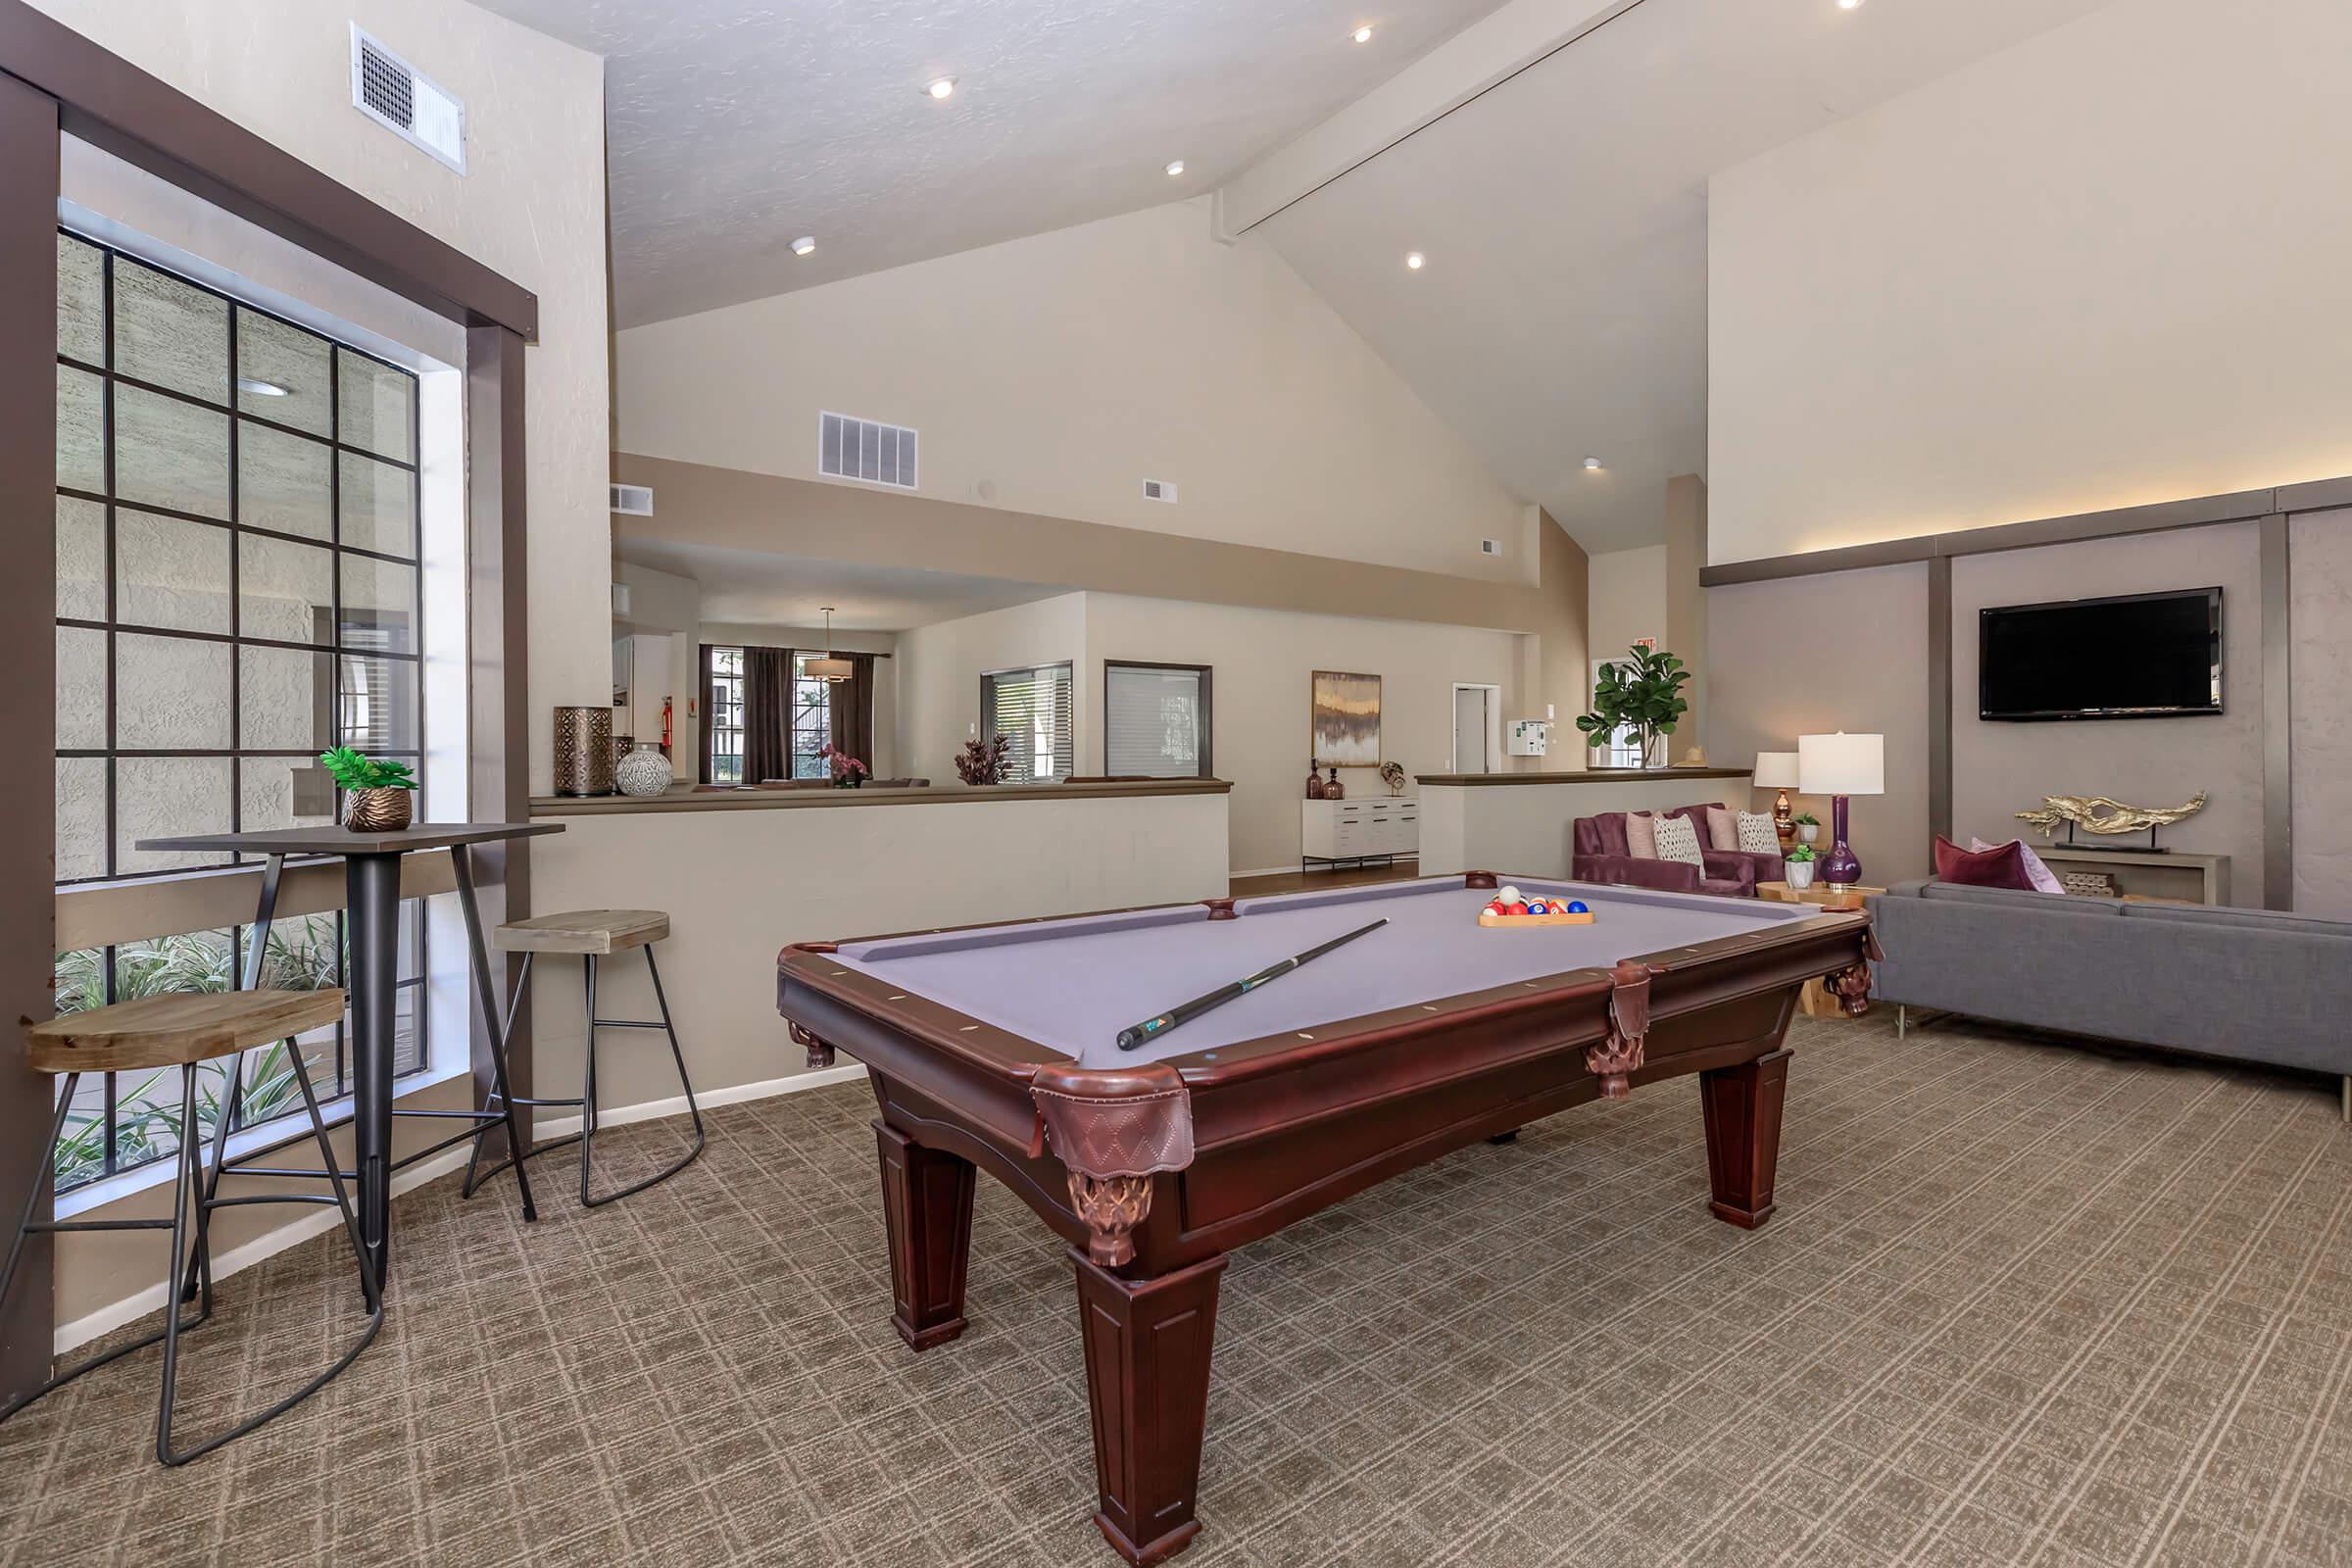 The community room with a pool table